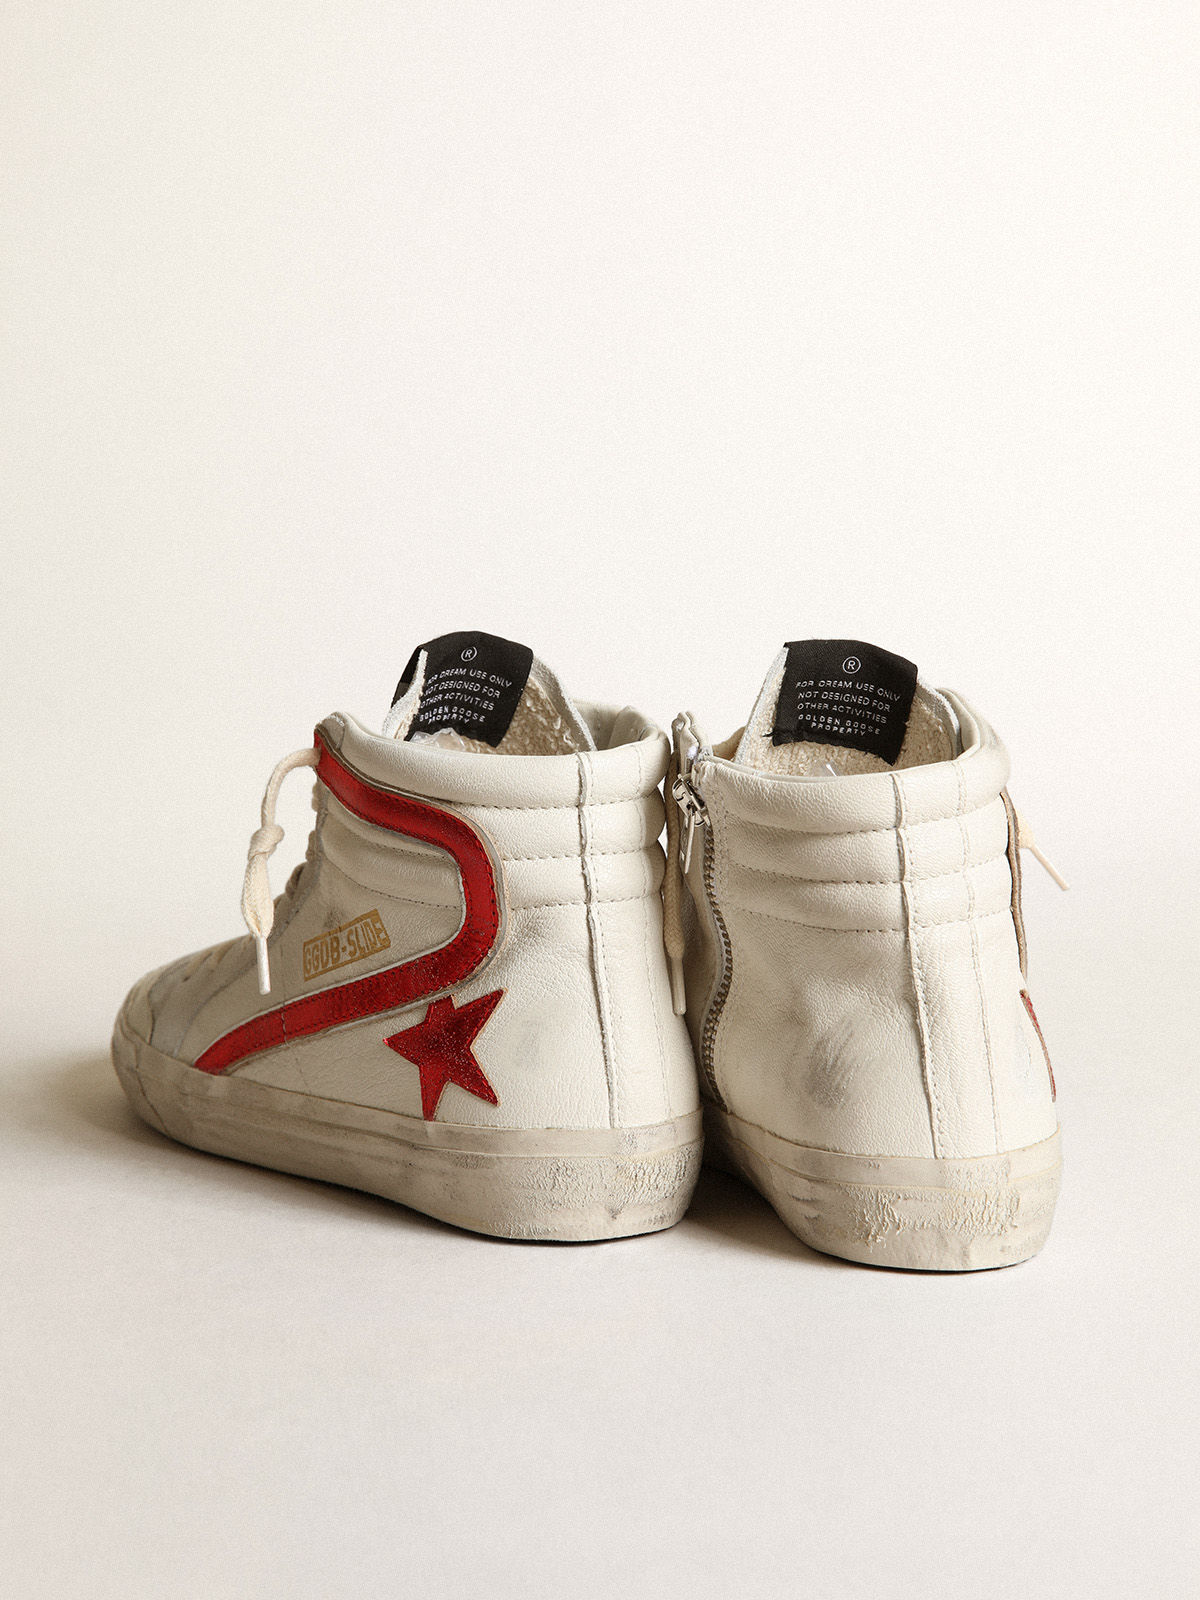 Slide with a red laminated leather star and flash | Golden Goose